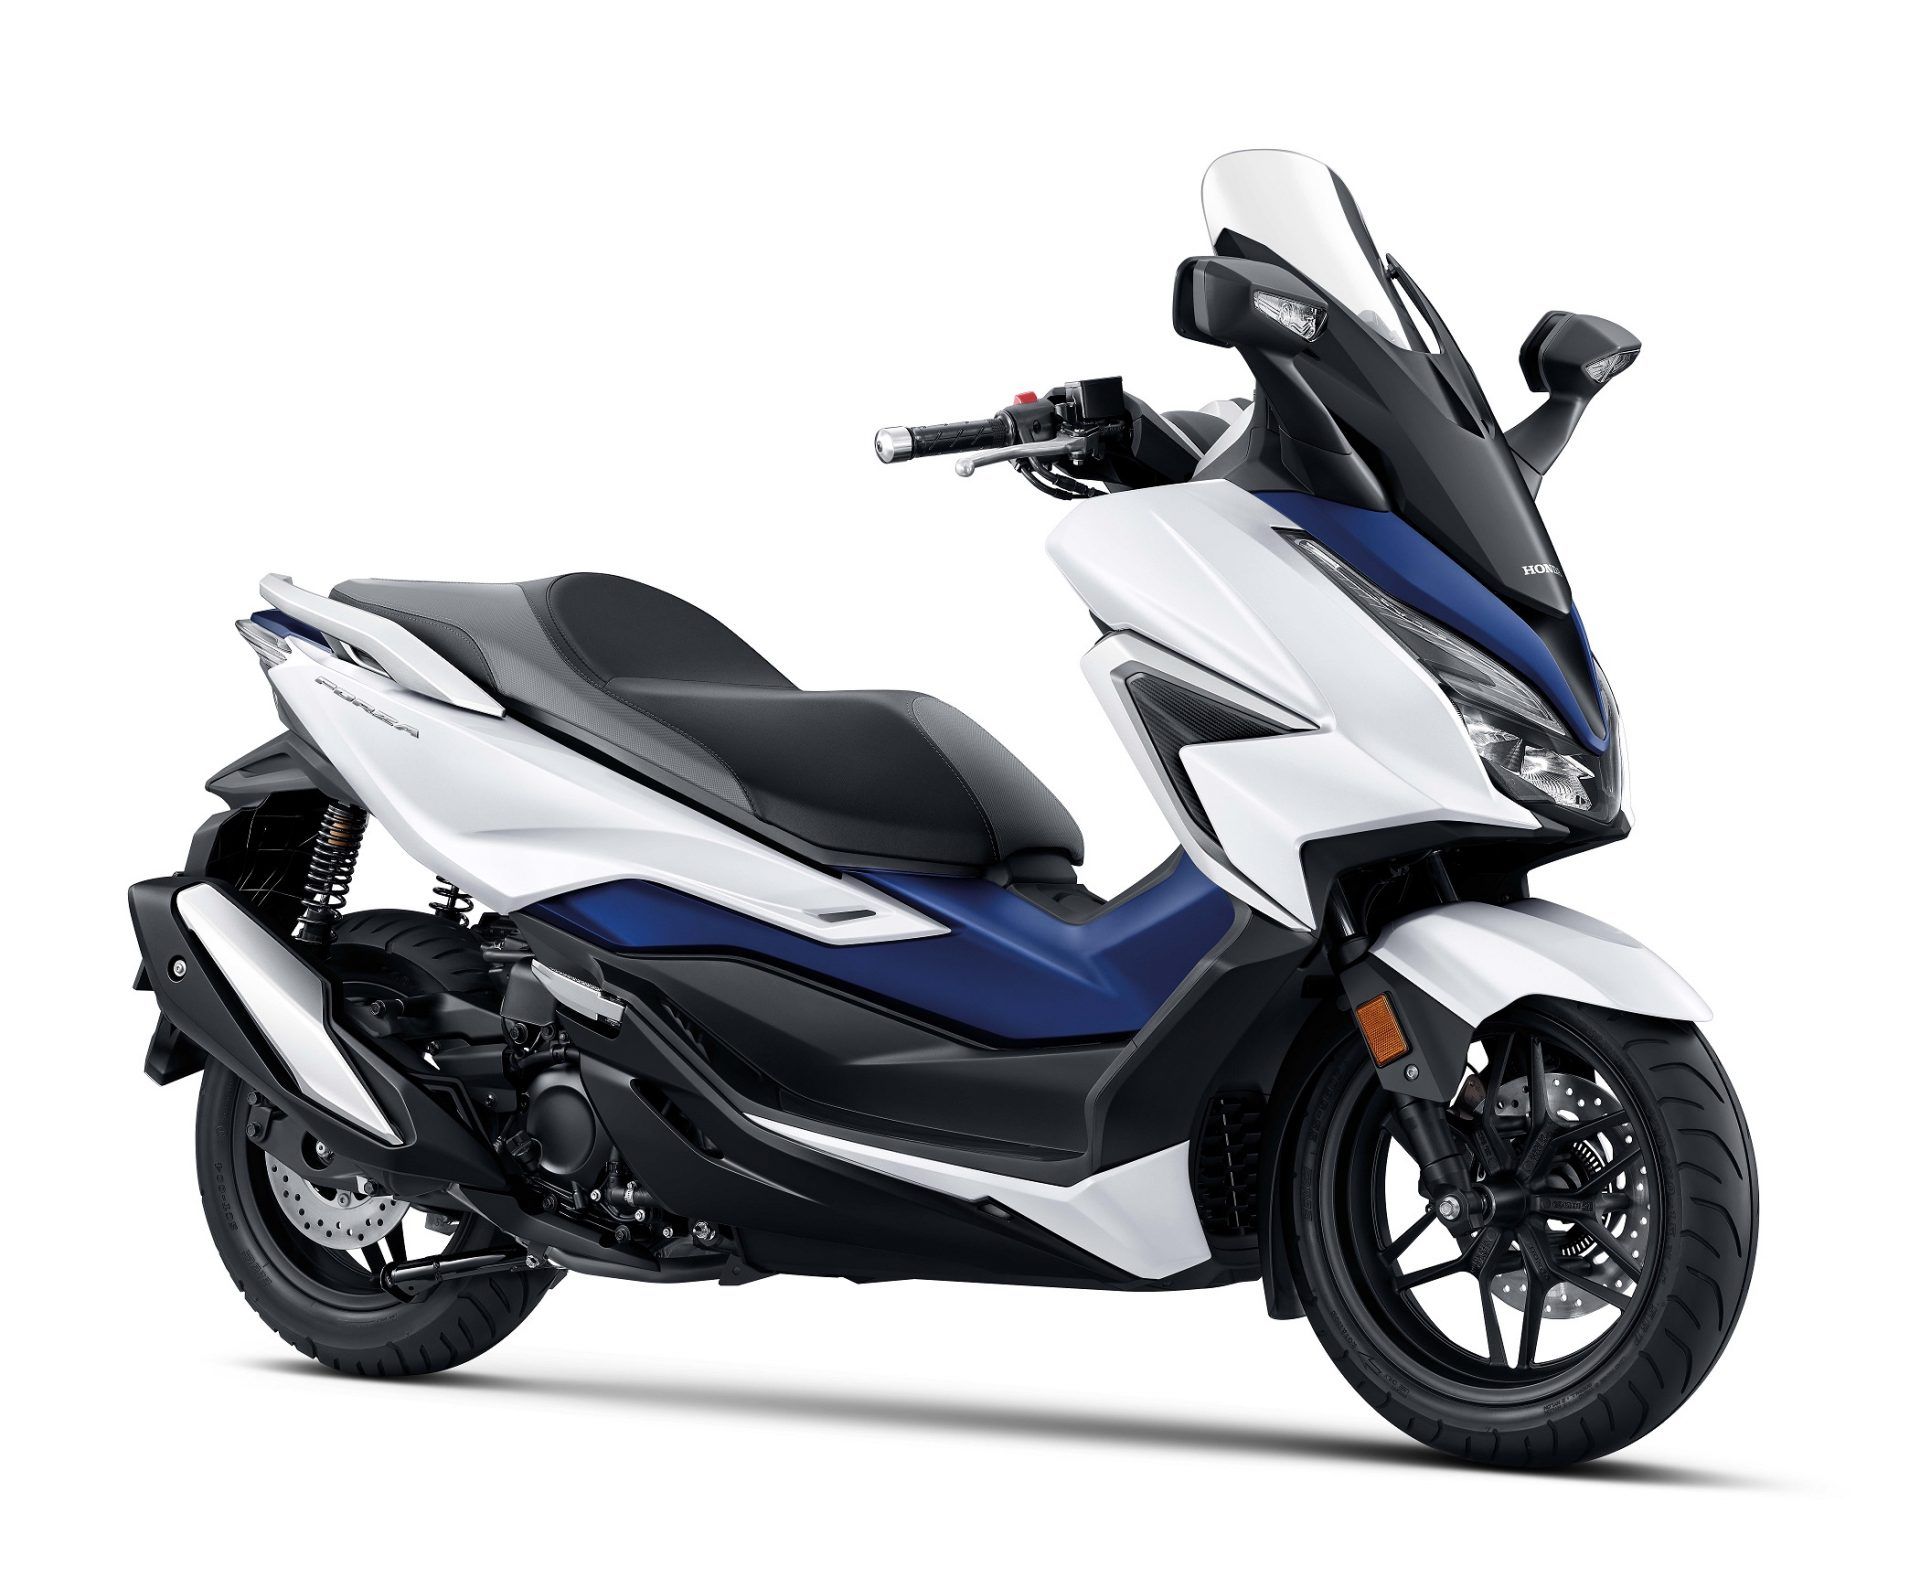 2021 Honda Forza 350 breaks cover overseas. Likely to arrive in